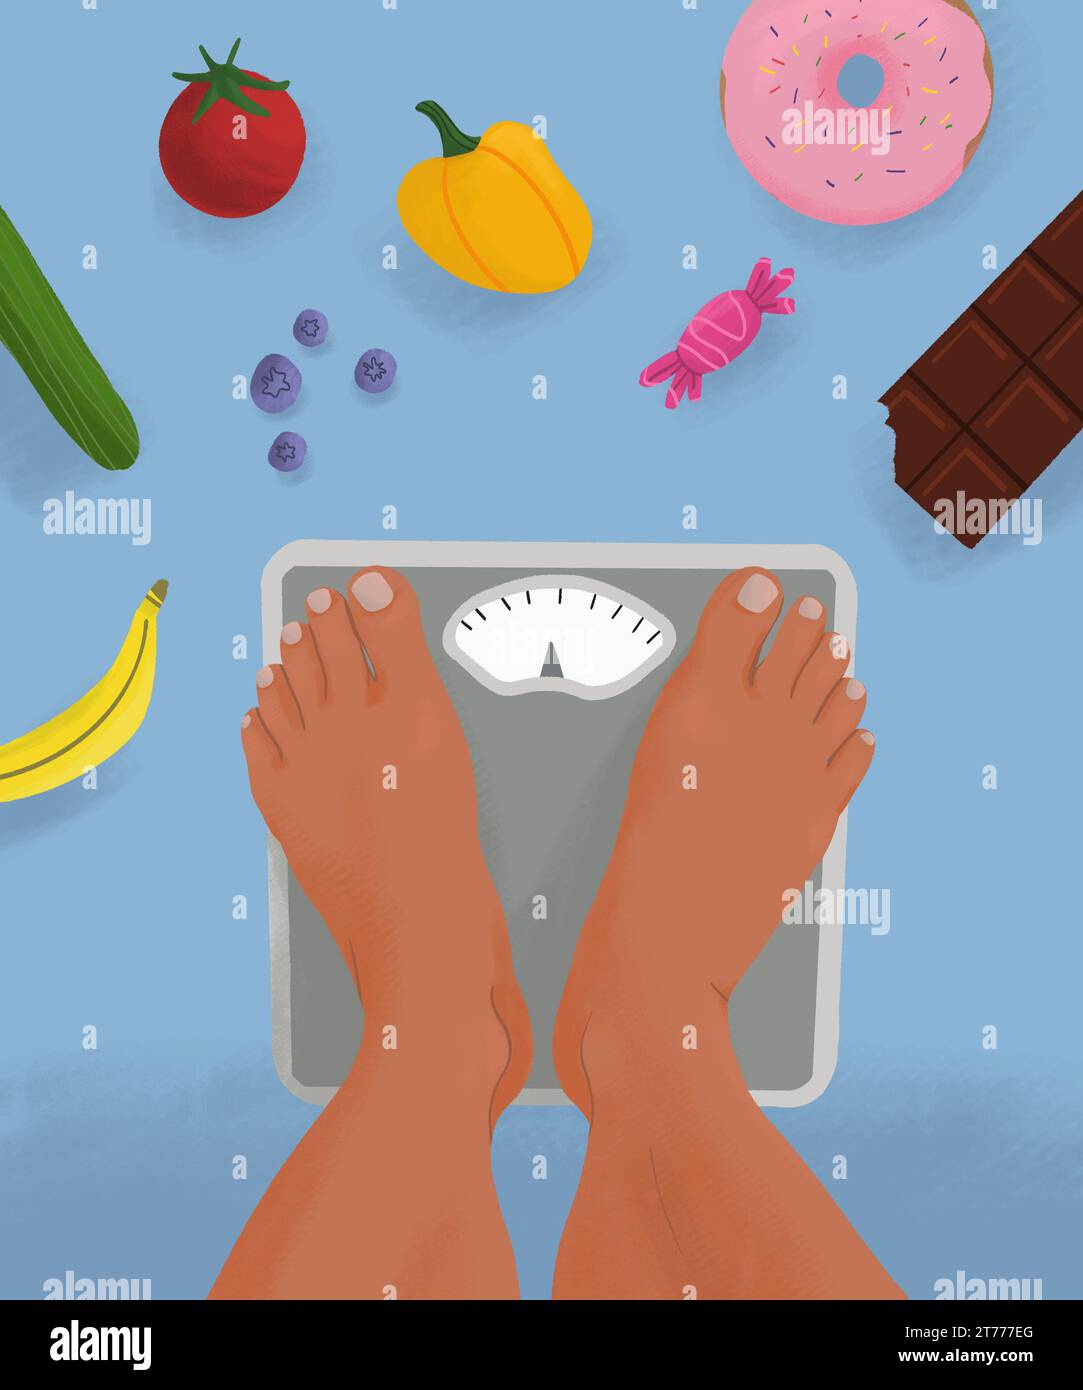 https://c8.alamy.com/comp/2T777EG/pov-view-from-above-barefoot-woman-standing-on-weight-scale-surrounded-by-unhealthy-and-healthy-food-2T777EG.jpg